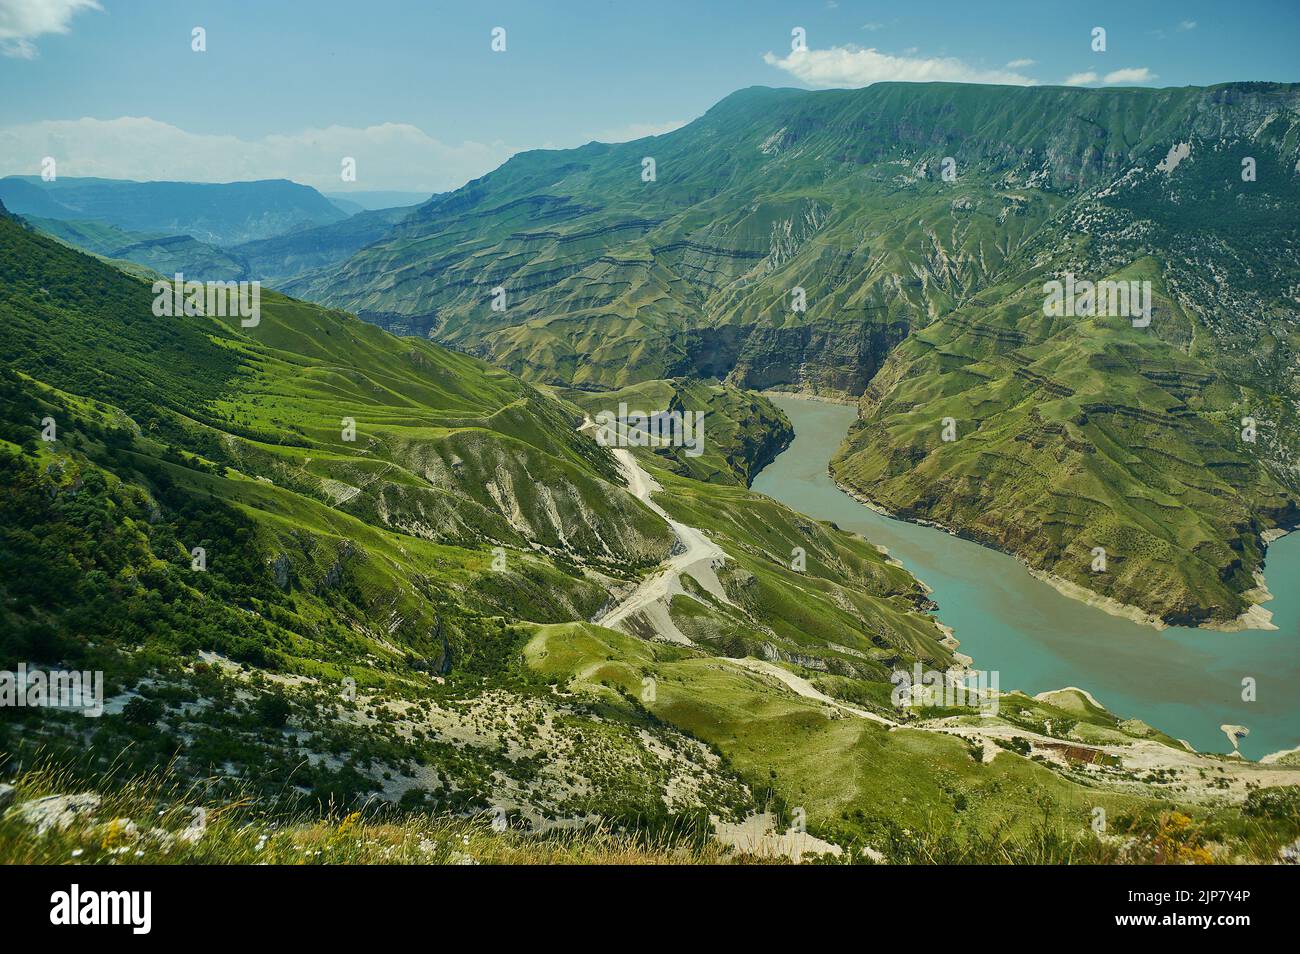 Sulak Canyon, steep-sided deepest canyon in Europe carved by the Sulak River in Dagestan, Russia. Stock Photo